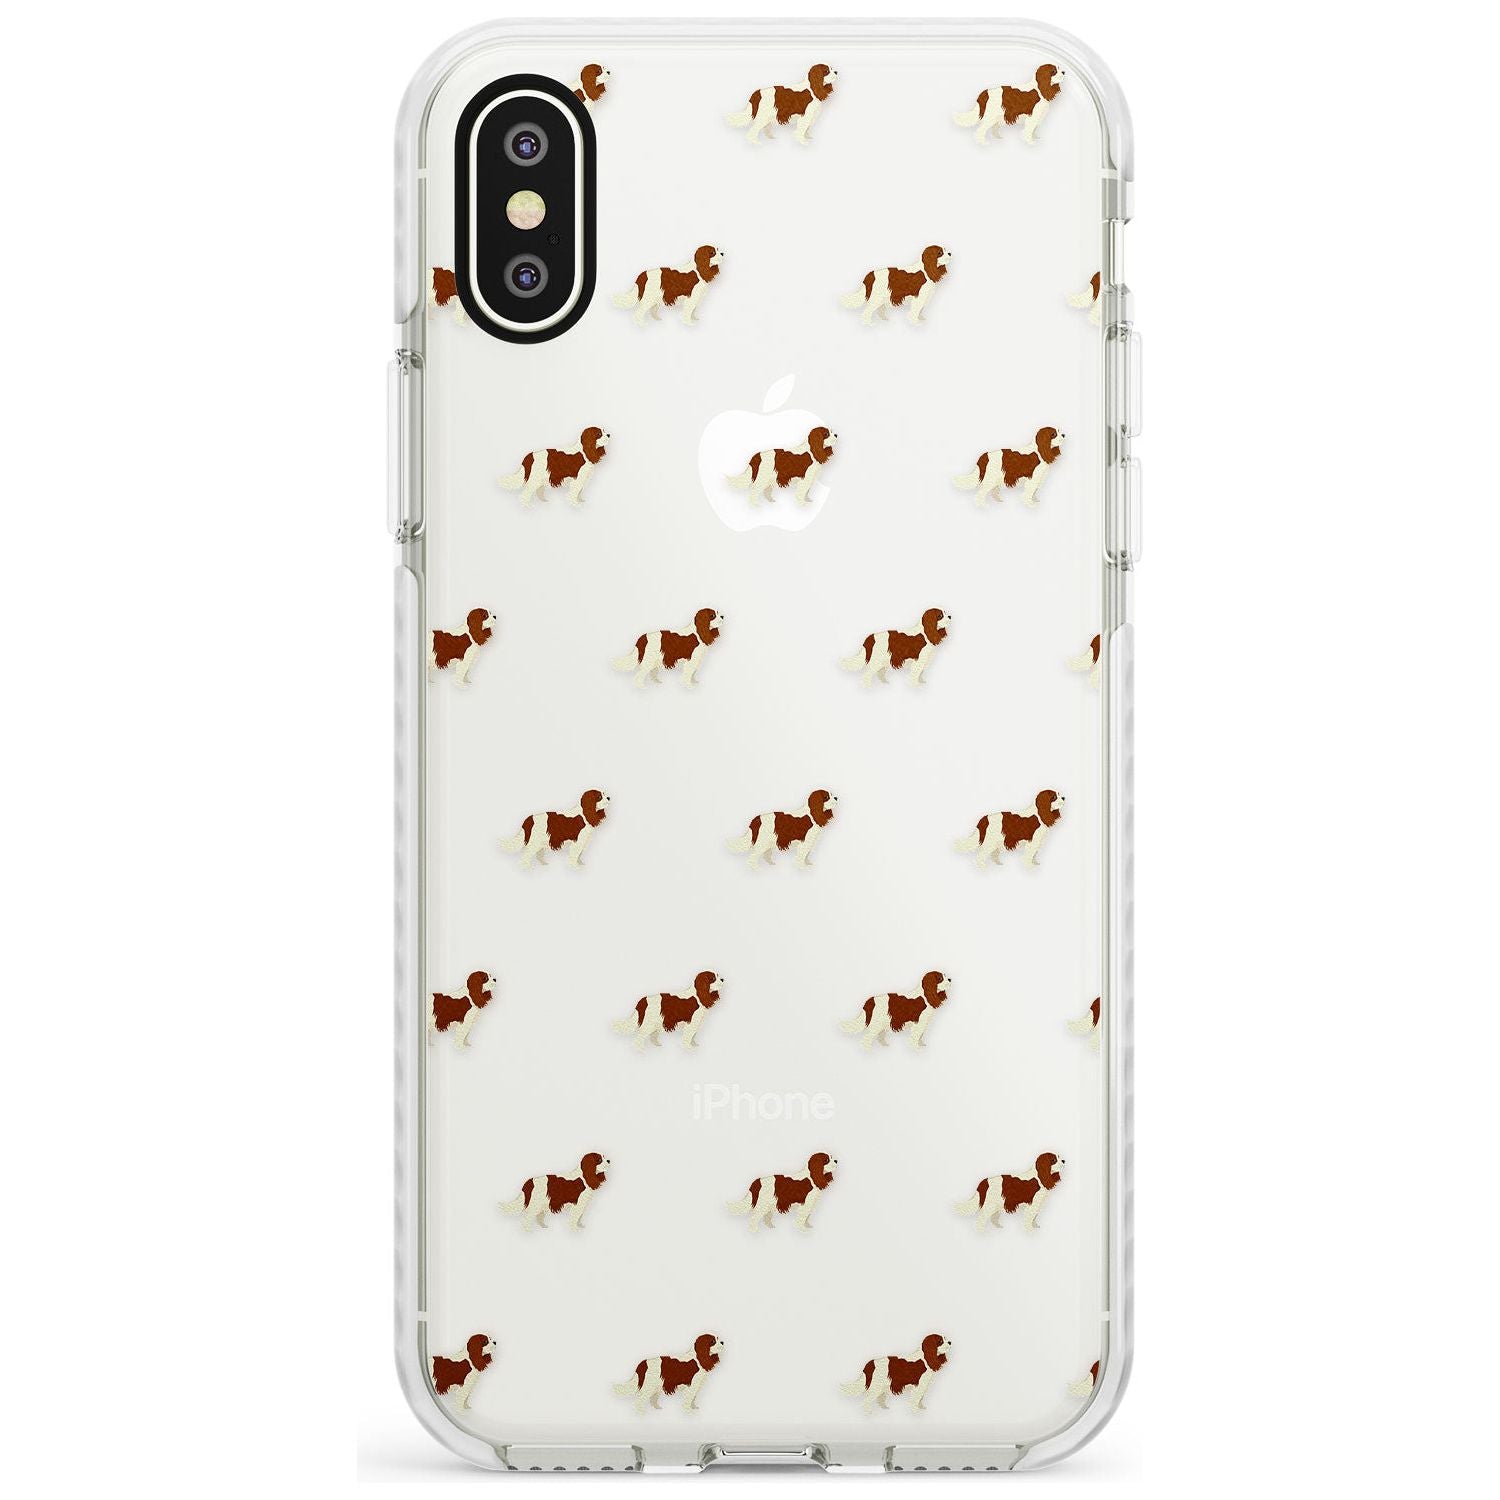 Cavalier King Charles Spaniel Pattern Clear Impact Phone Case for iPhone X XS Max XR